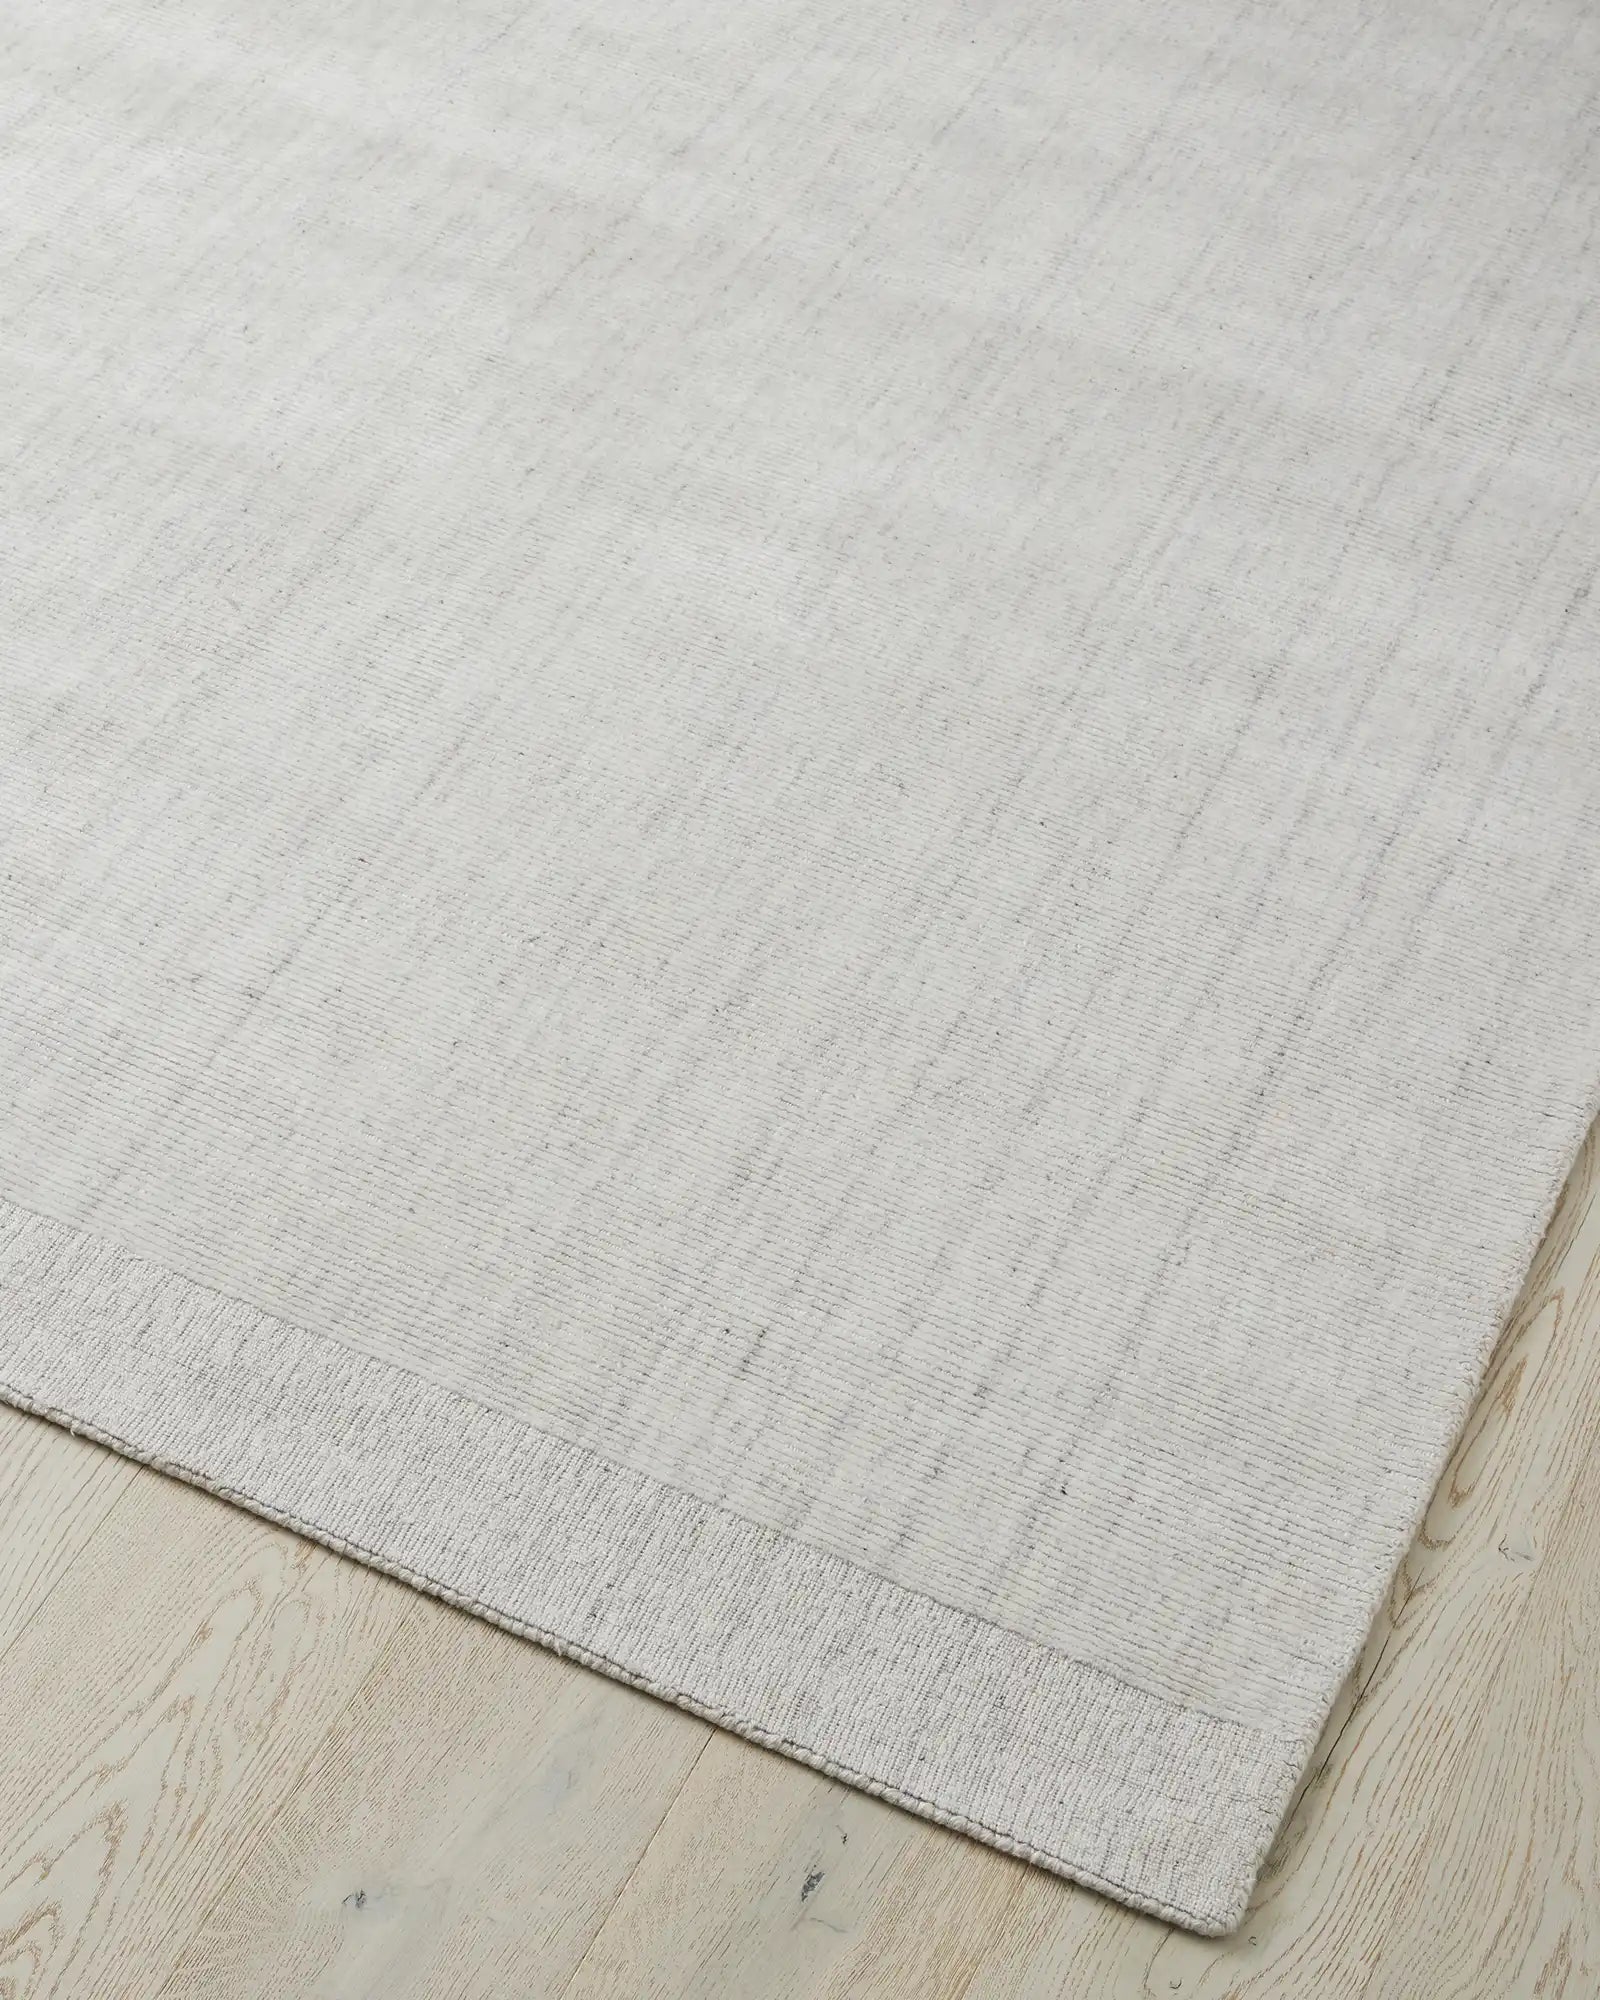 Edge and backing detail of the Travertine Rug, showcasing its quality construction and durable design